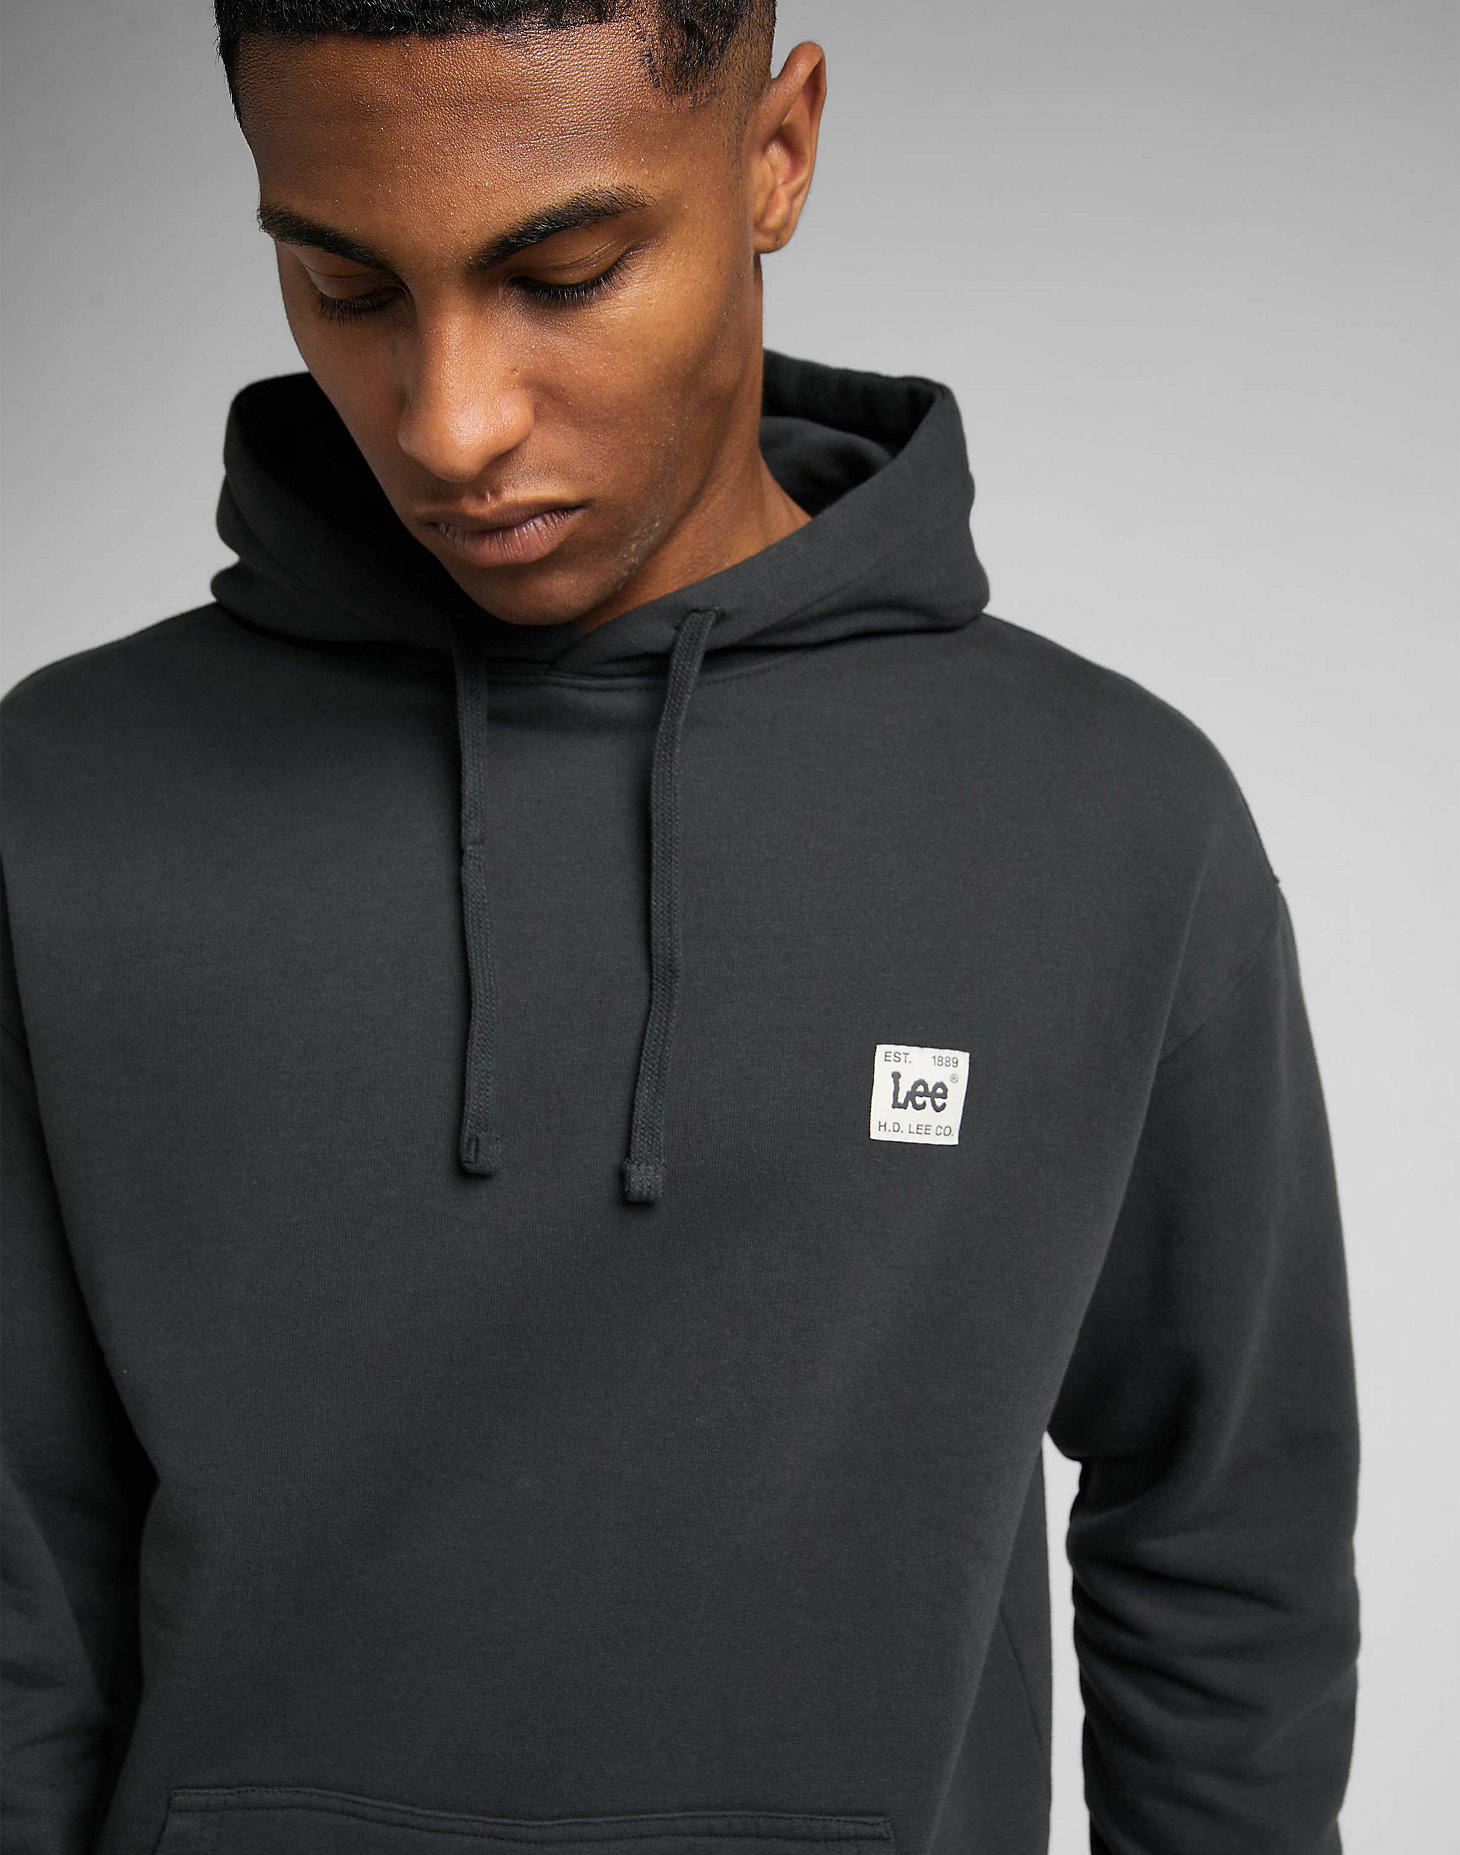 Core Loose Hoodie in Washed Black alternative view 4